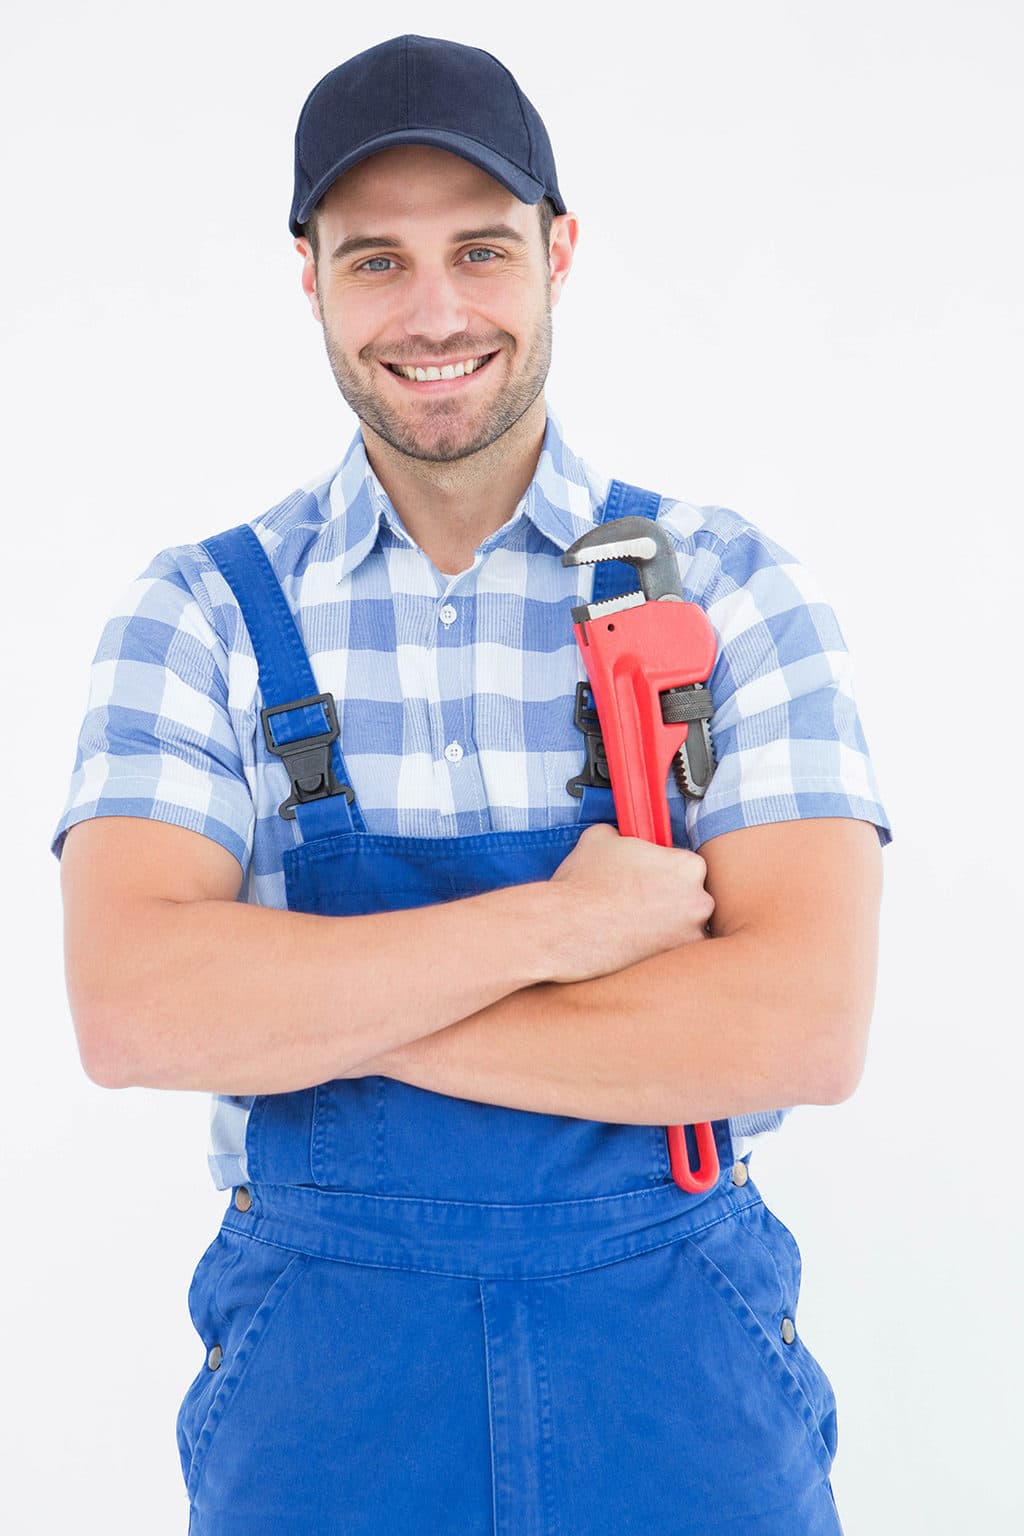 7 Questions You Should Ask Before Hiring a Plumber | Plumber in Garden City, SC